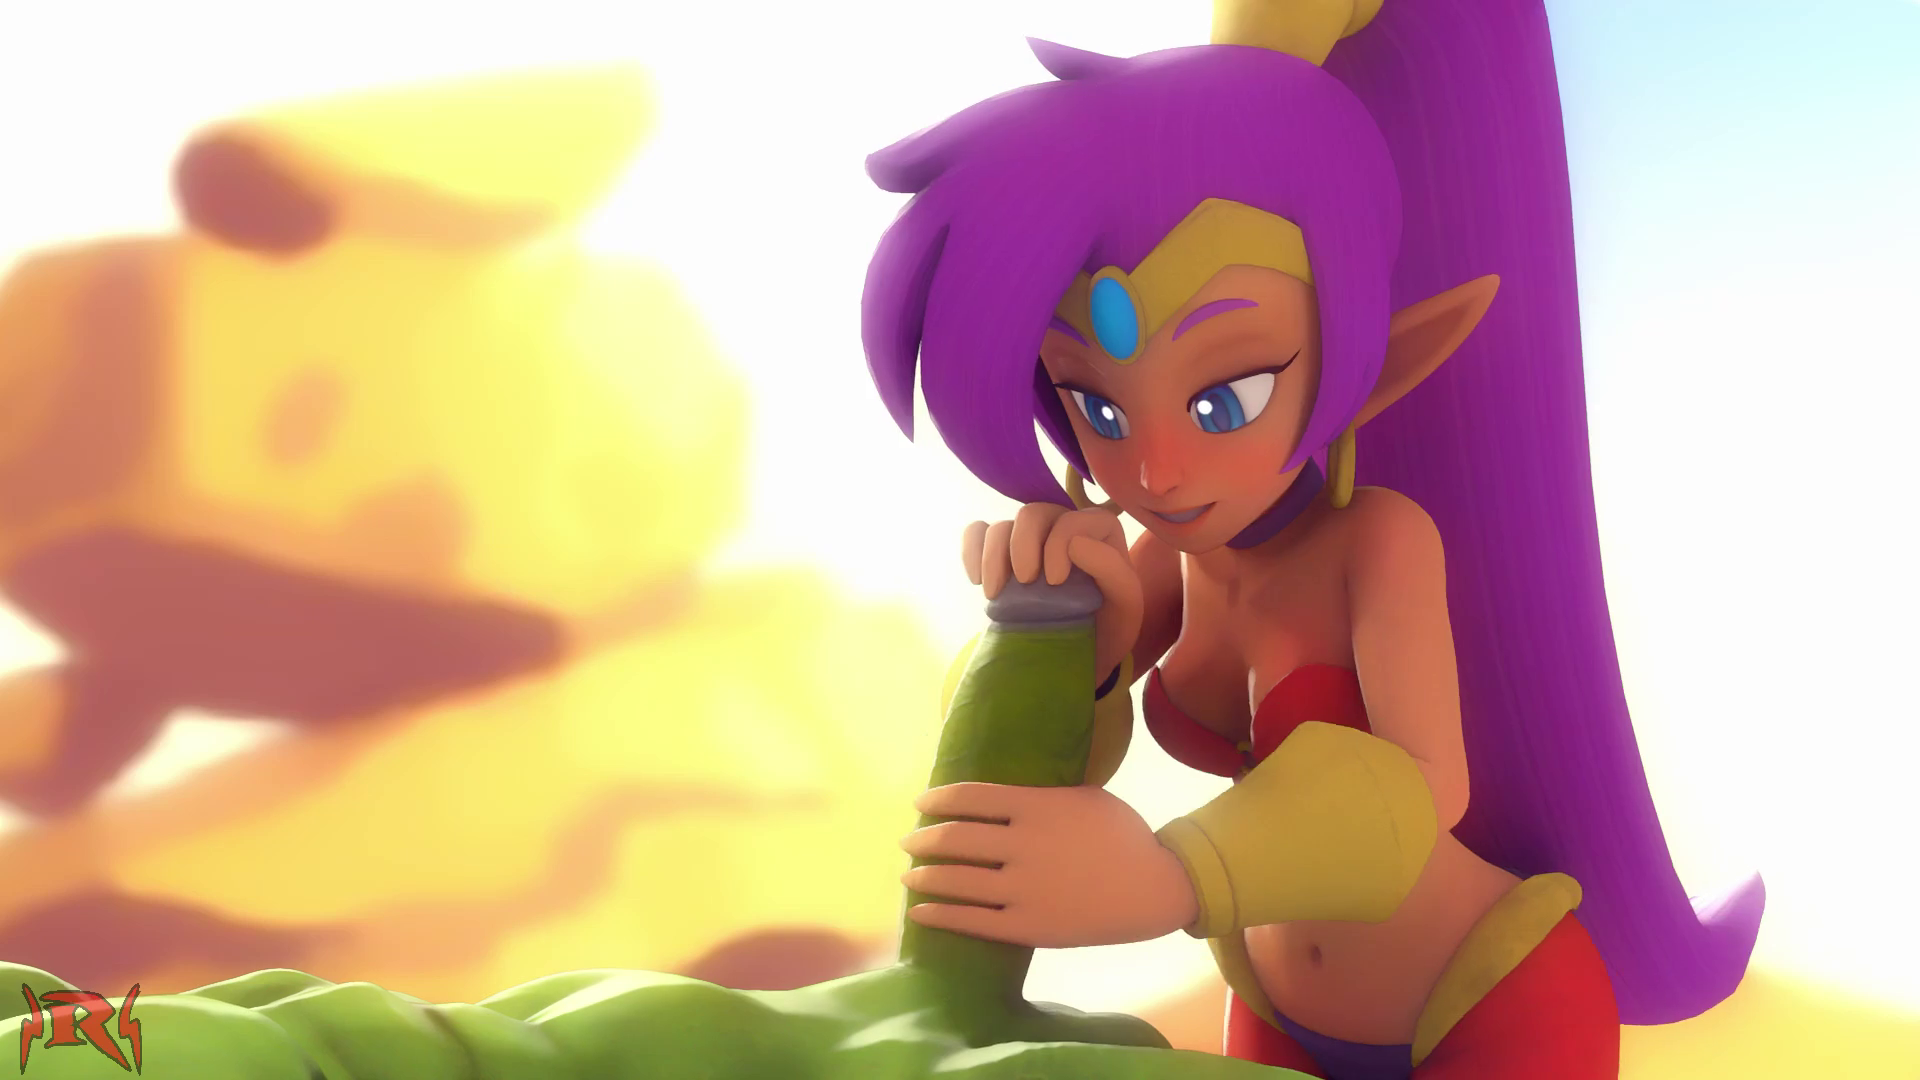 Video by Rexx with the username @rexxworld, who is a verified user,  August 13, 2020 at 7:50 PM. The post is about the topic 3D Animation Gaming and the text says '[SOUND] (Shantae) Rubbing the Wrong Thing.  Sound a little goofy but was when I started doing sound as a norm.
#3D #Shantae #Half-Genie #Orc #Handjob
Like what I do? Funding links in my profile, or just send some Flame'